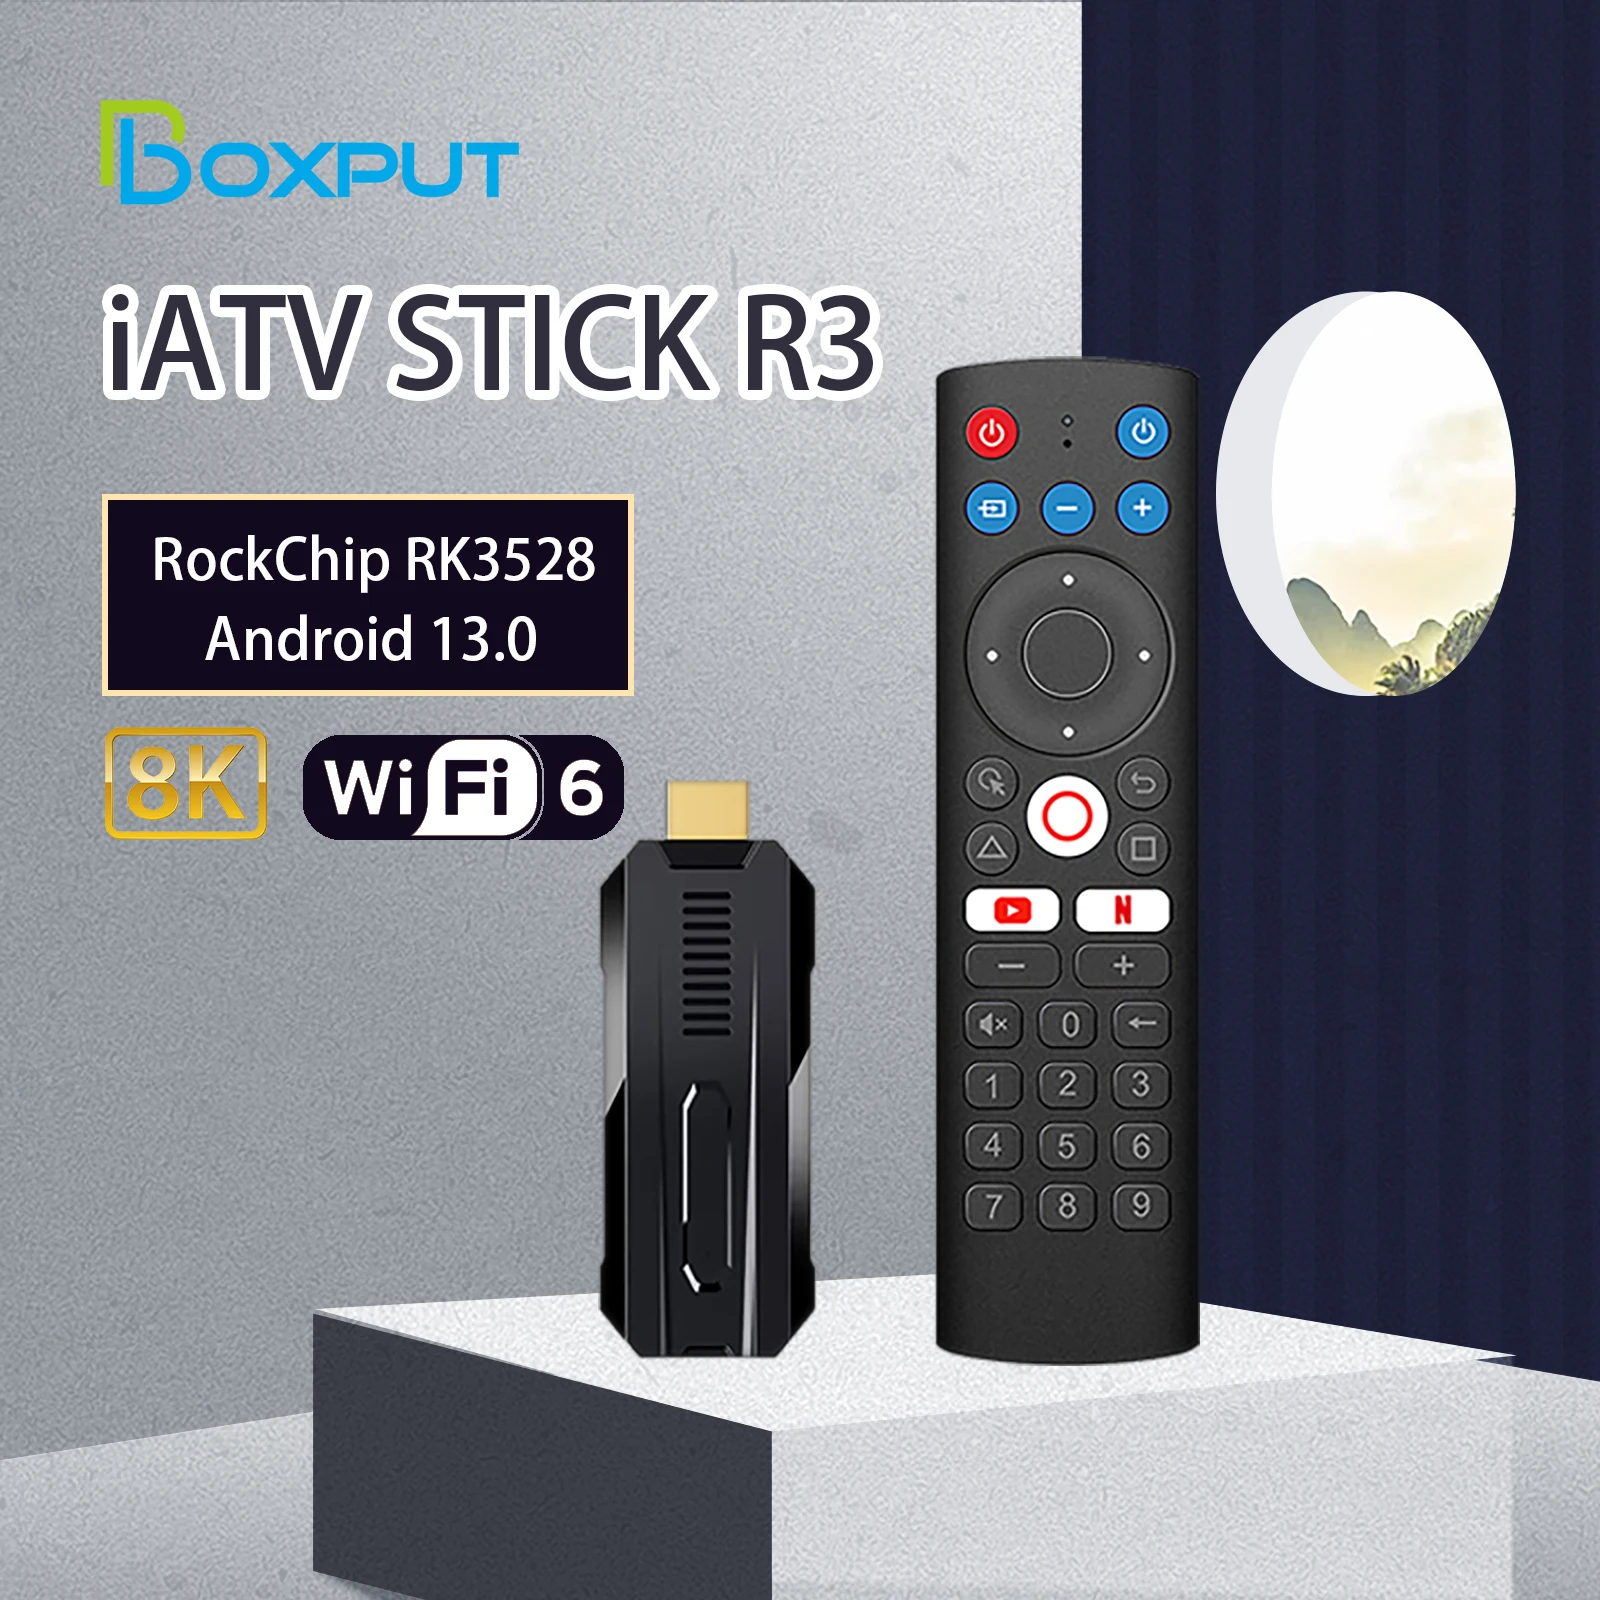 BOXPUT Android 13.0 iATV R3 Fire TV Stick RockChip RK3528 8K Portable TVbox 2.4G/5G WiFi6 BT5.0 OTG TF Slot With Screencasting liquefied welding gas torch fire gun with button ignition weed burner welding accessories for brazing tool outdoor picnic bbq